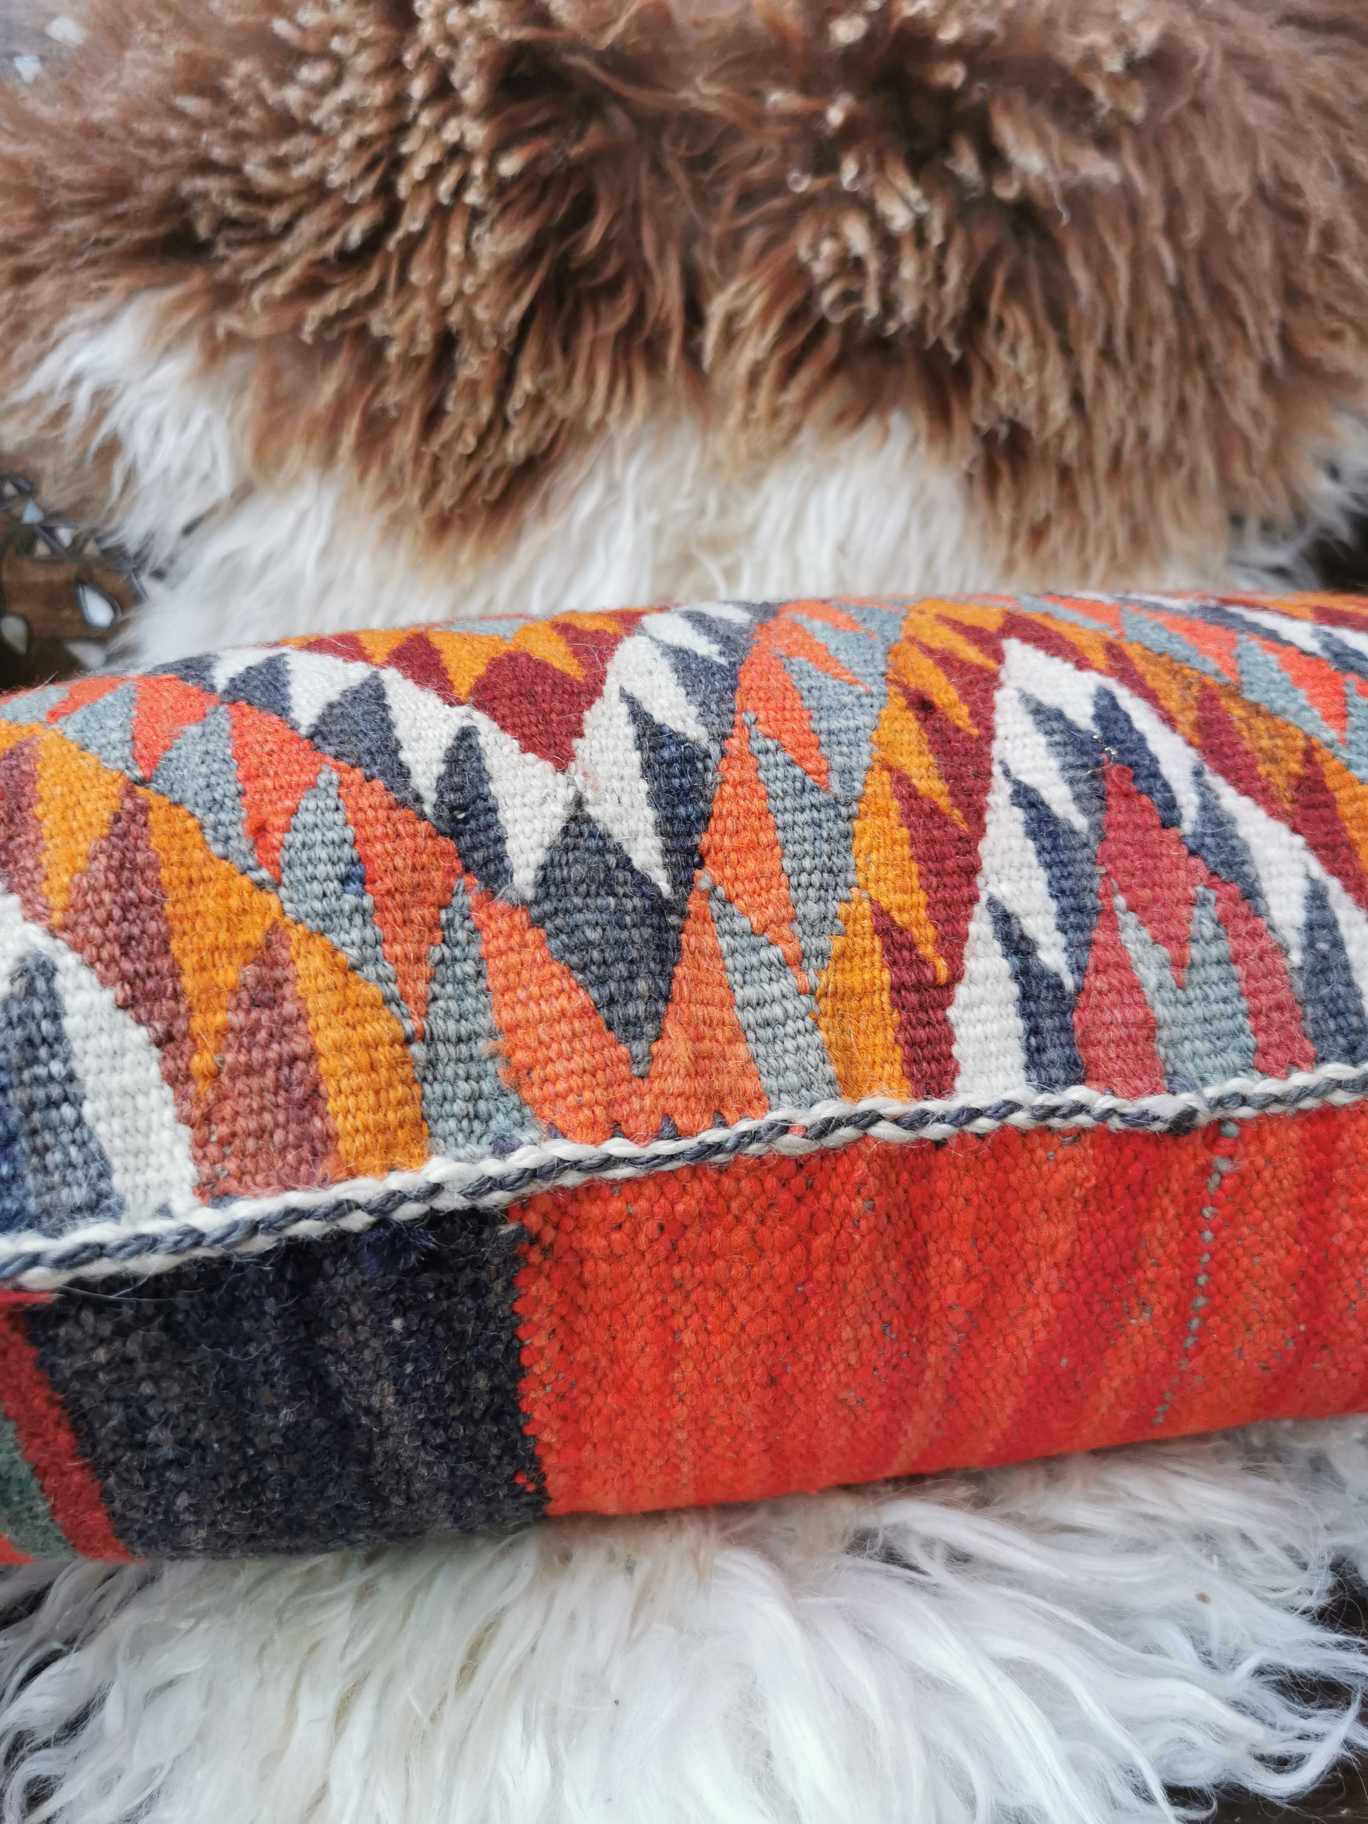 Vintage Kilim Pillow Cover from Iraq - Handmade, Boho Pillow Case